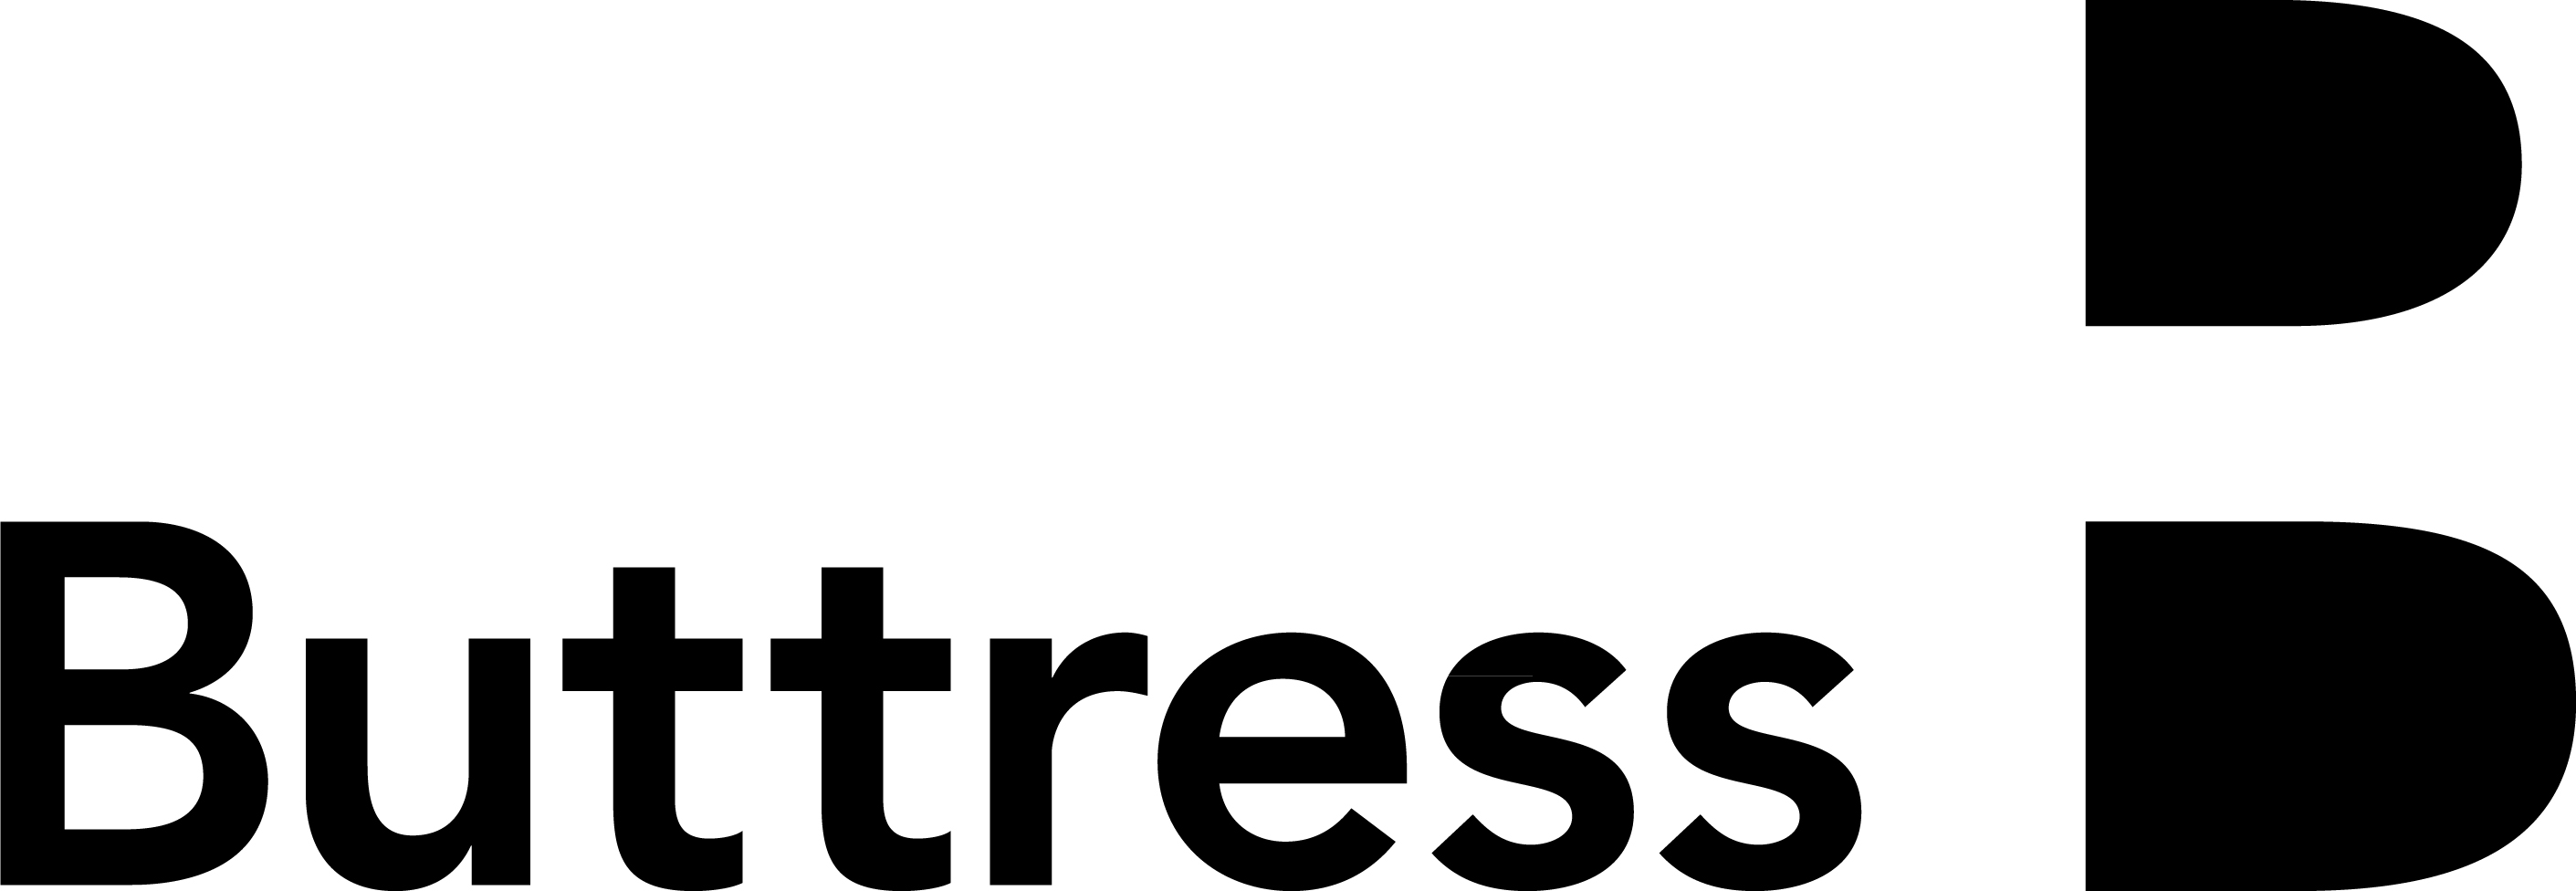 logo for Buttress Architects